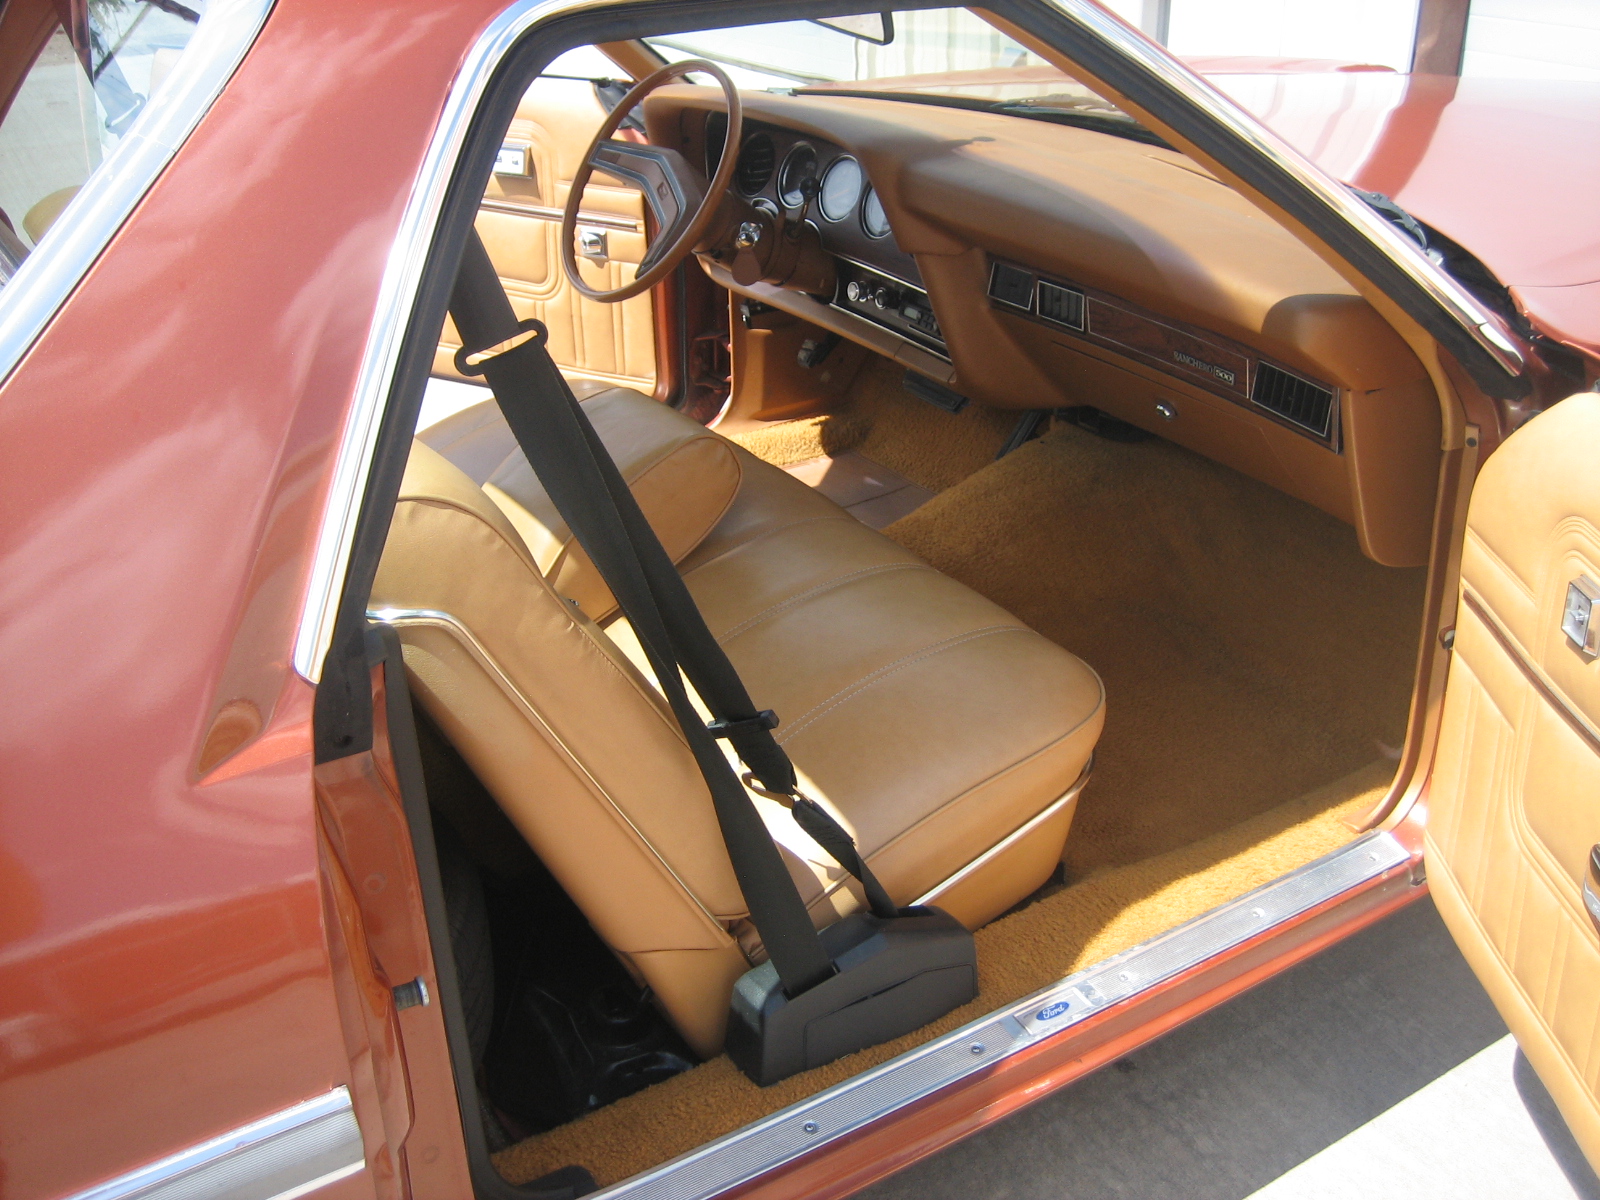 Interior of a Ford Ranchero after getting an automotive detailing at The Stable Performance Cars in Alpine, TX